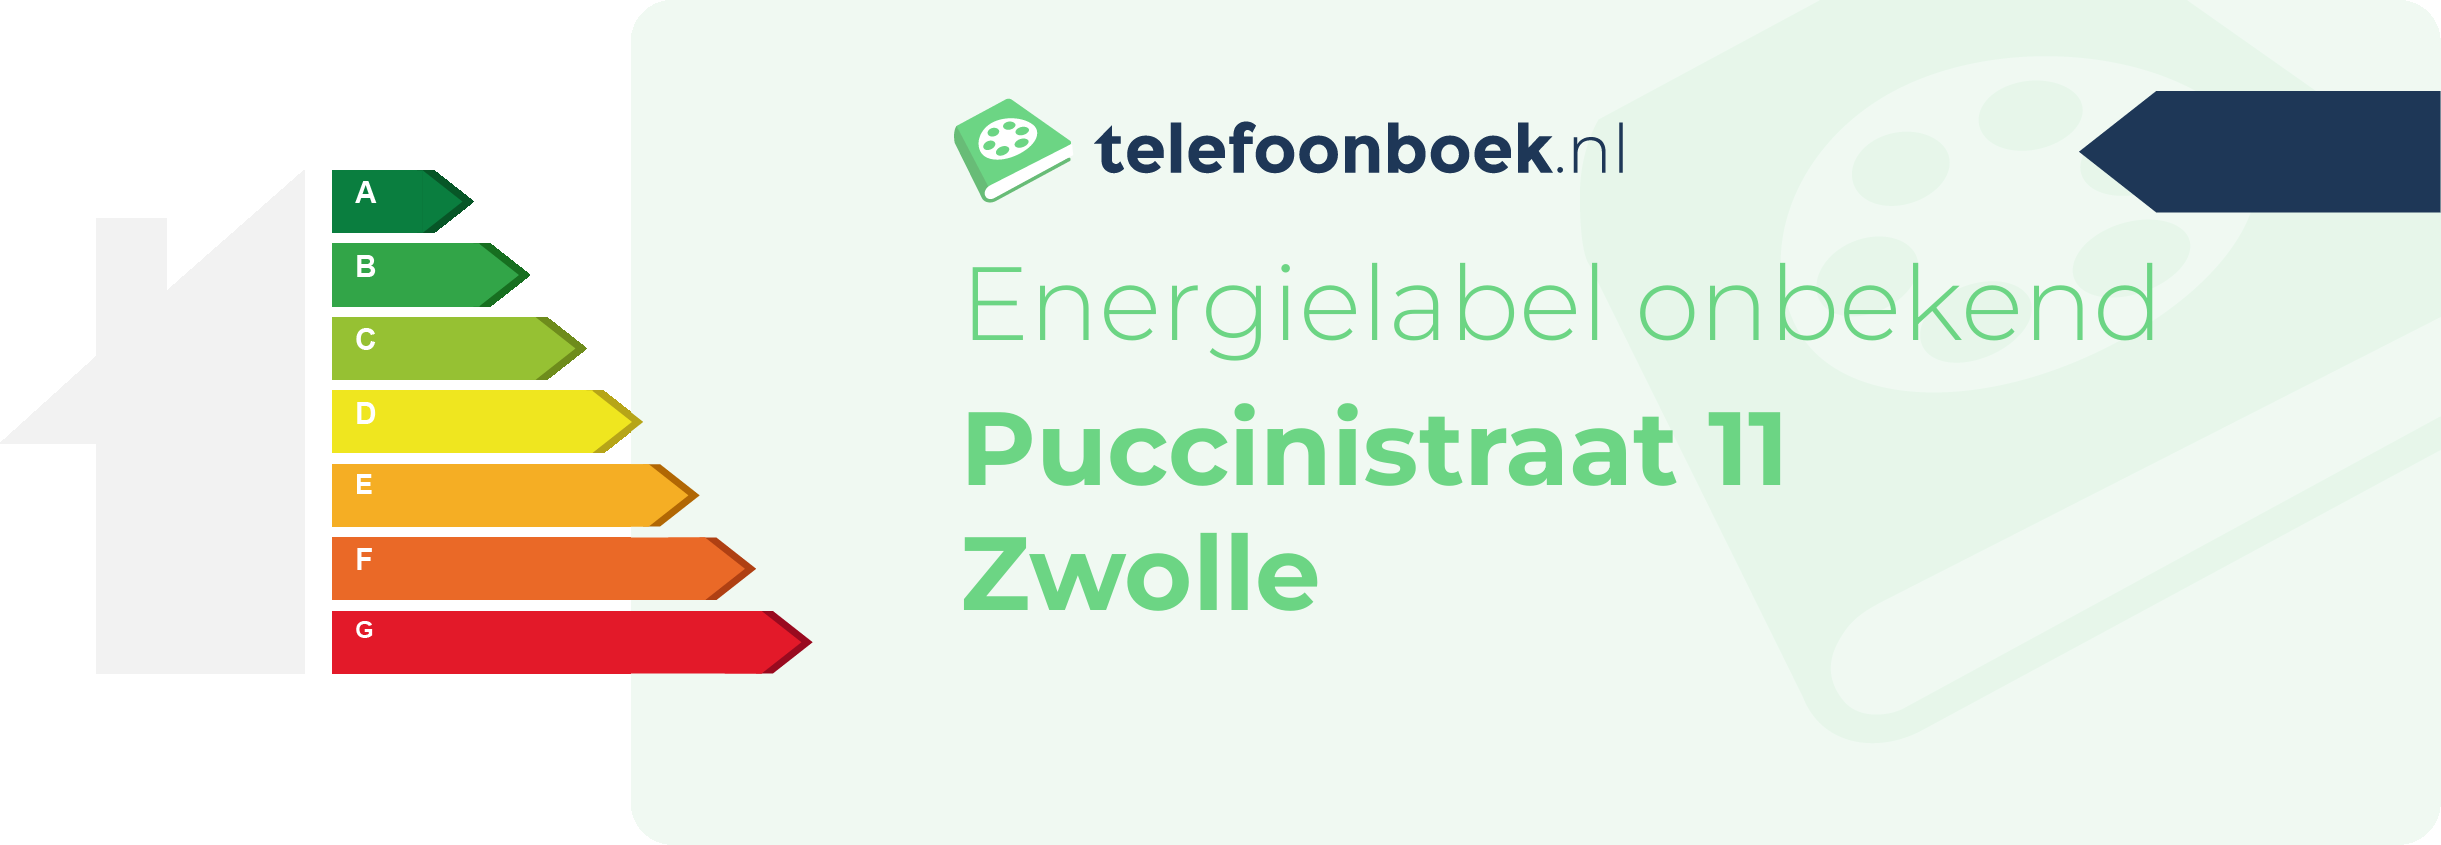 Energielabel Puccinistraat 11 Zwolle